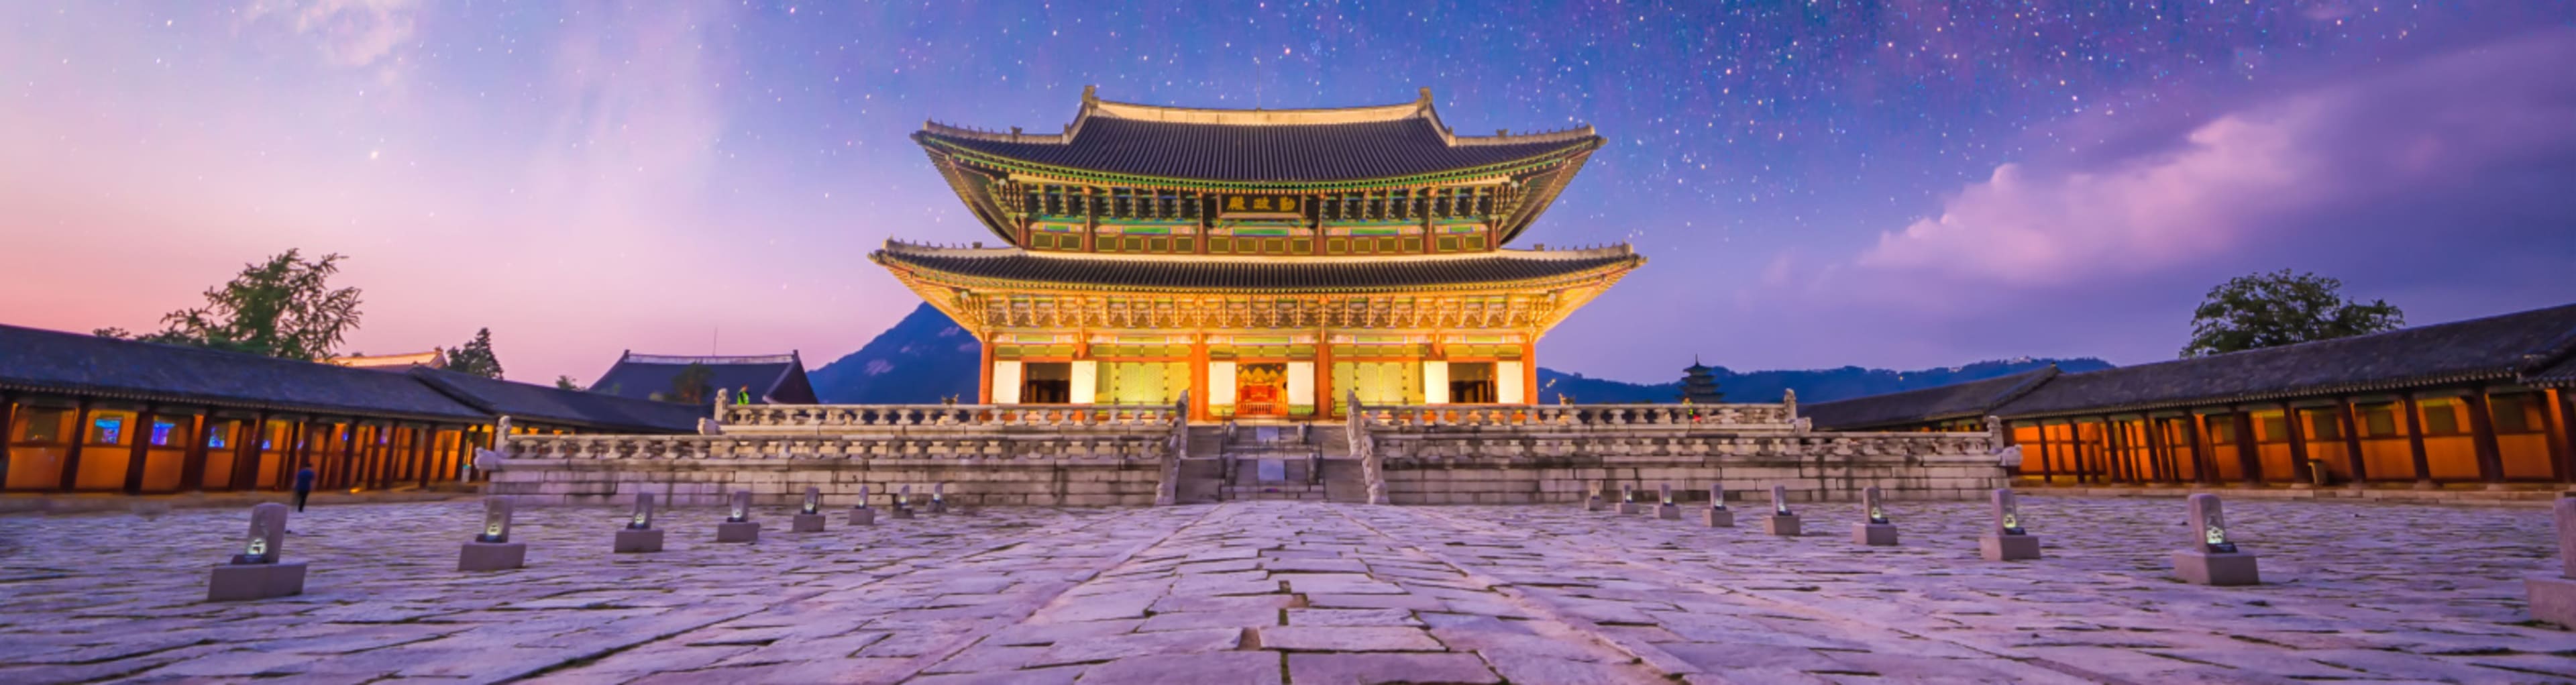 Seoul's palace at night with a starry background